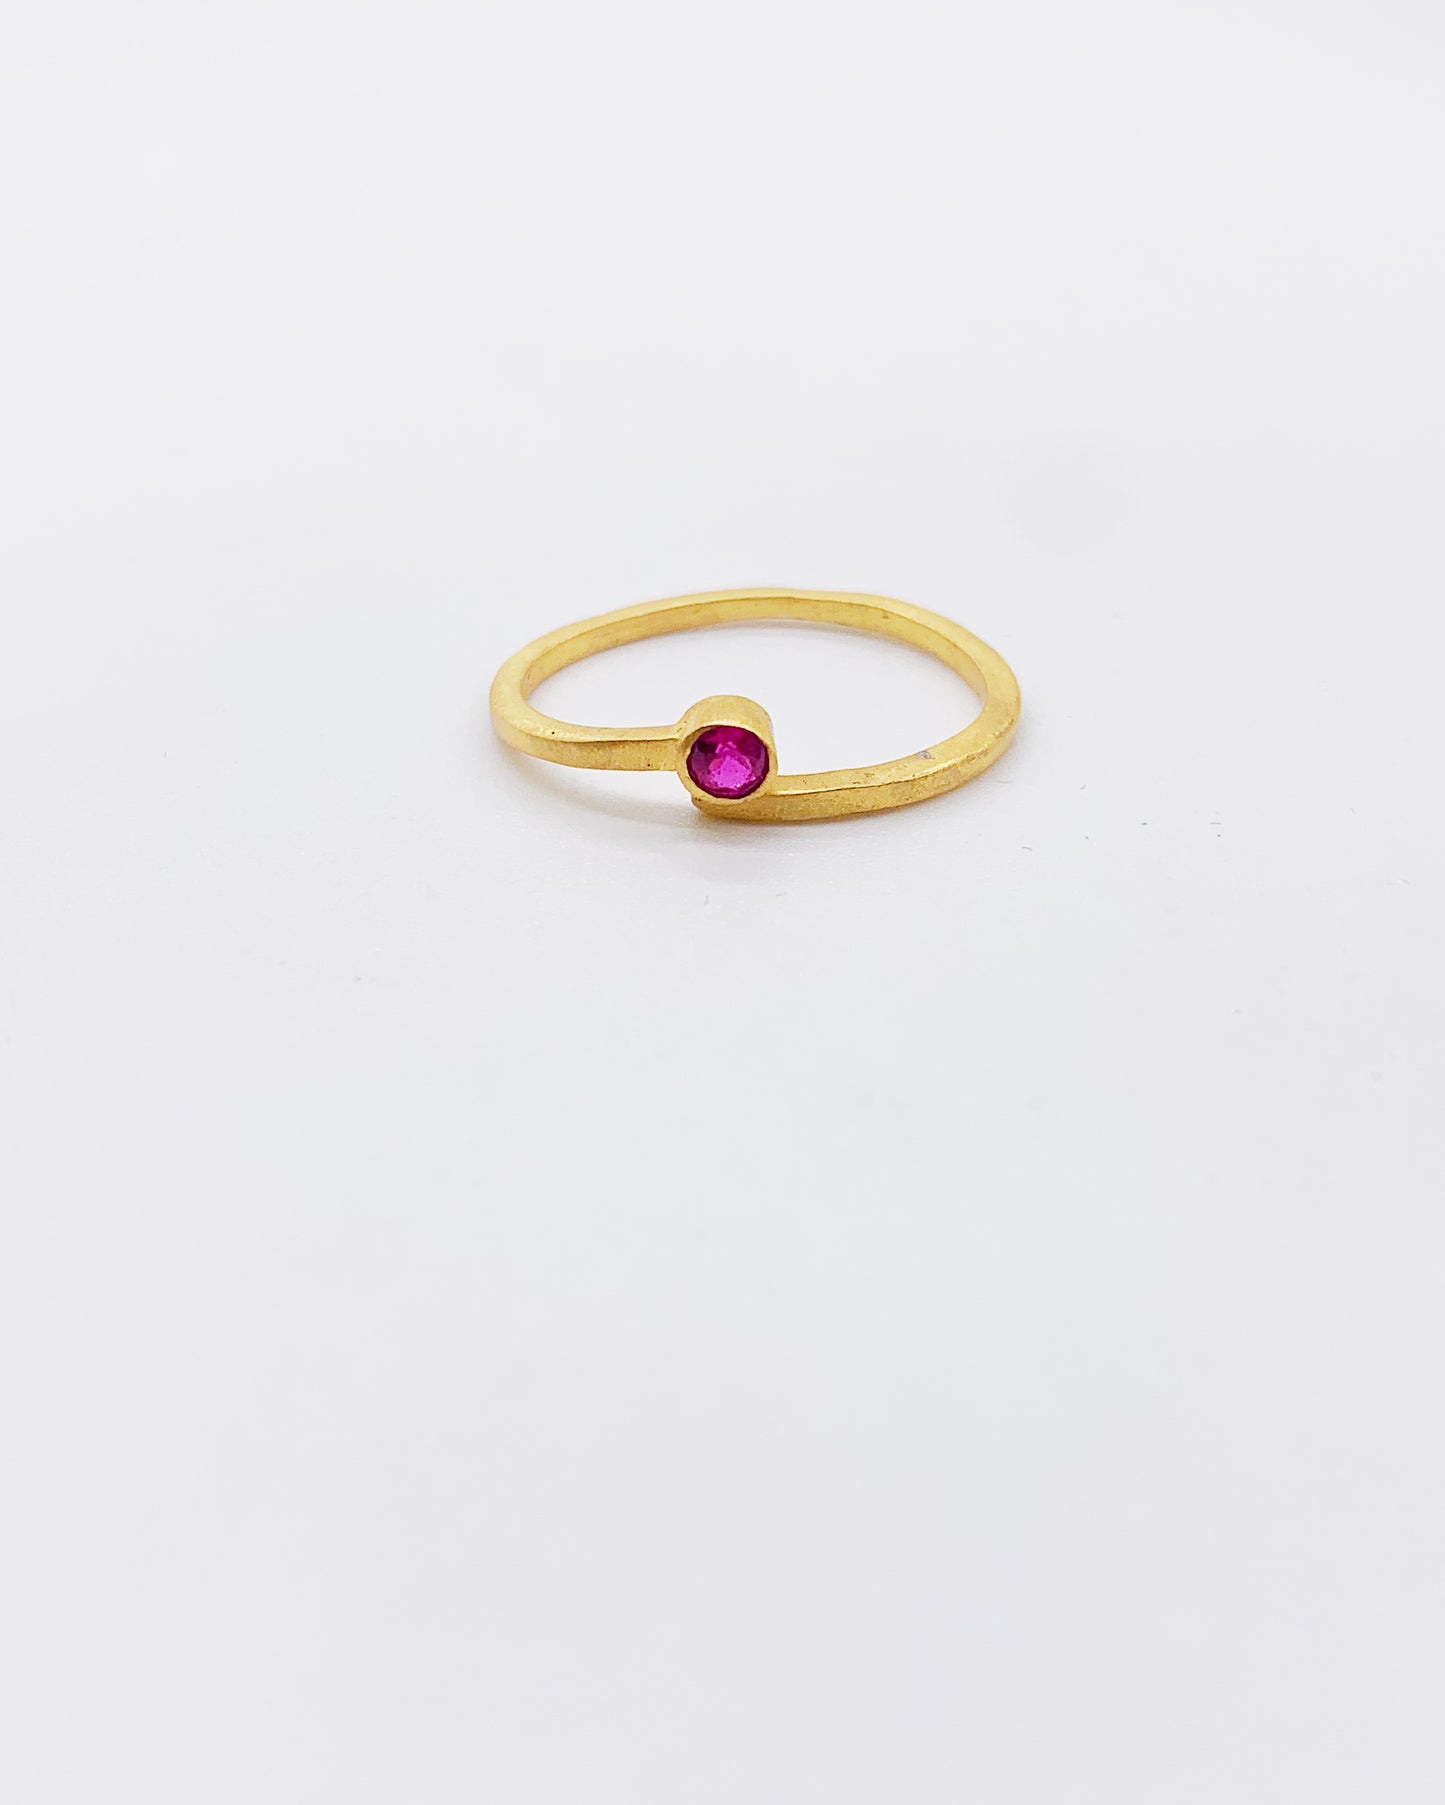 PINK CZ GOLD OVER BAND